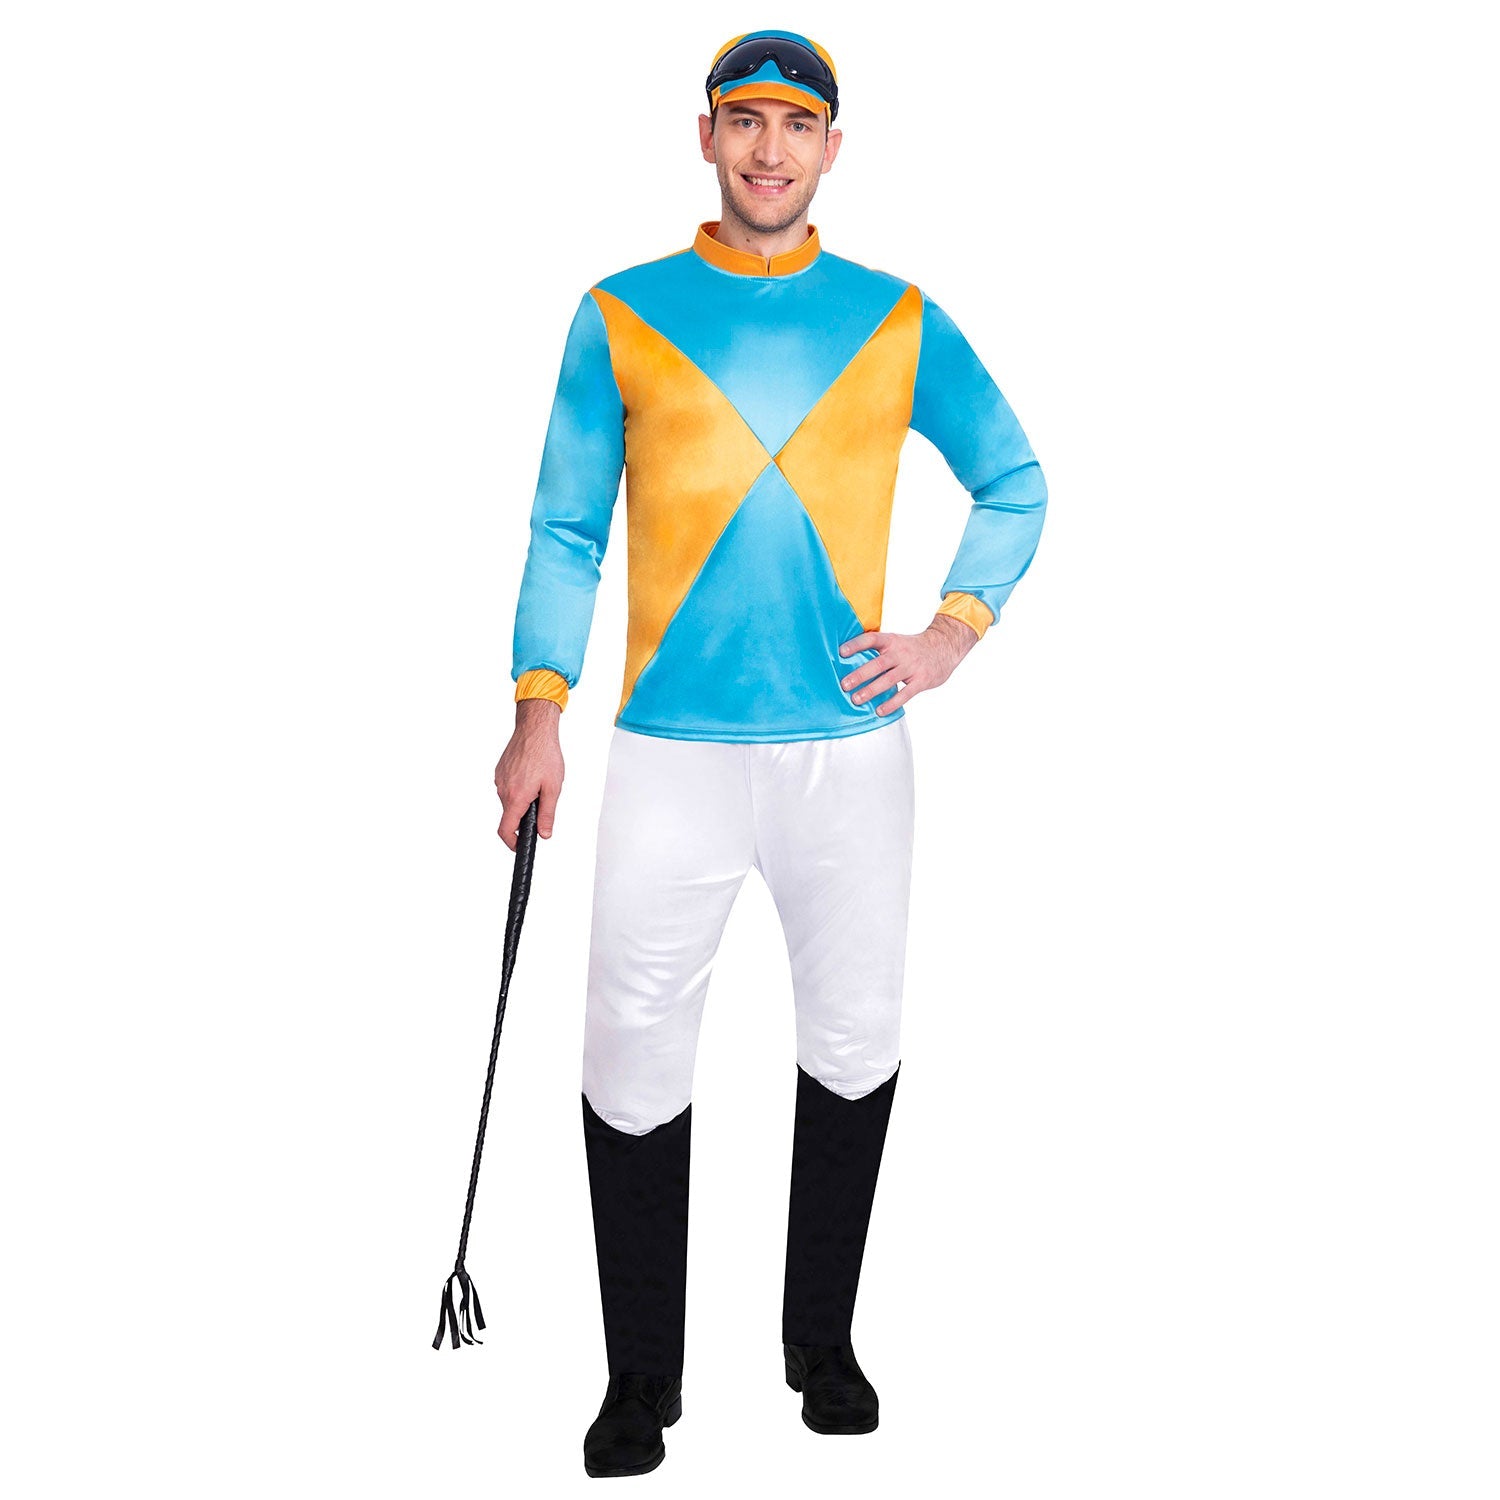 Mens Jockey Costume includes top, trousers, goggles and hat